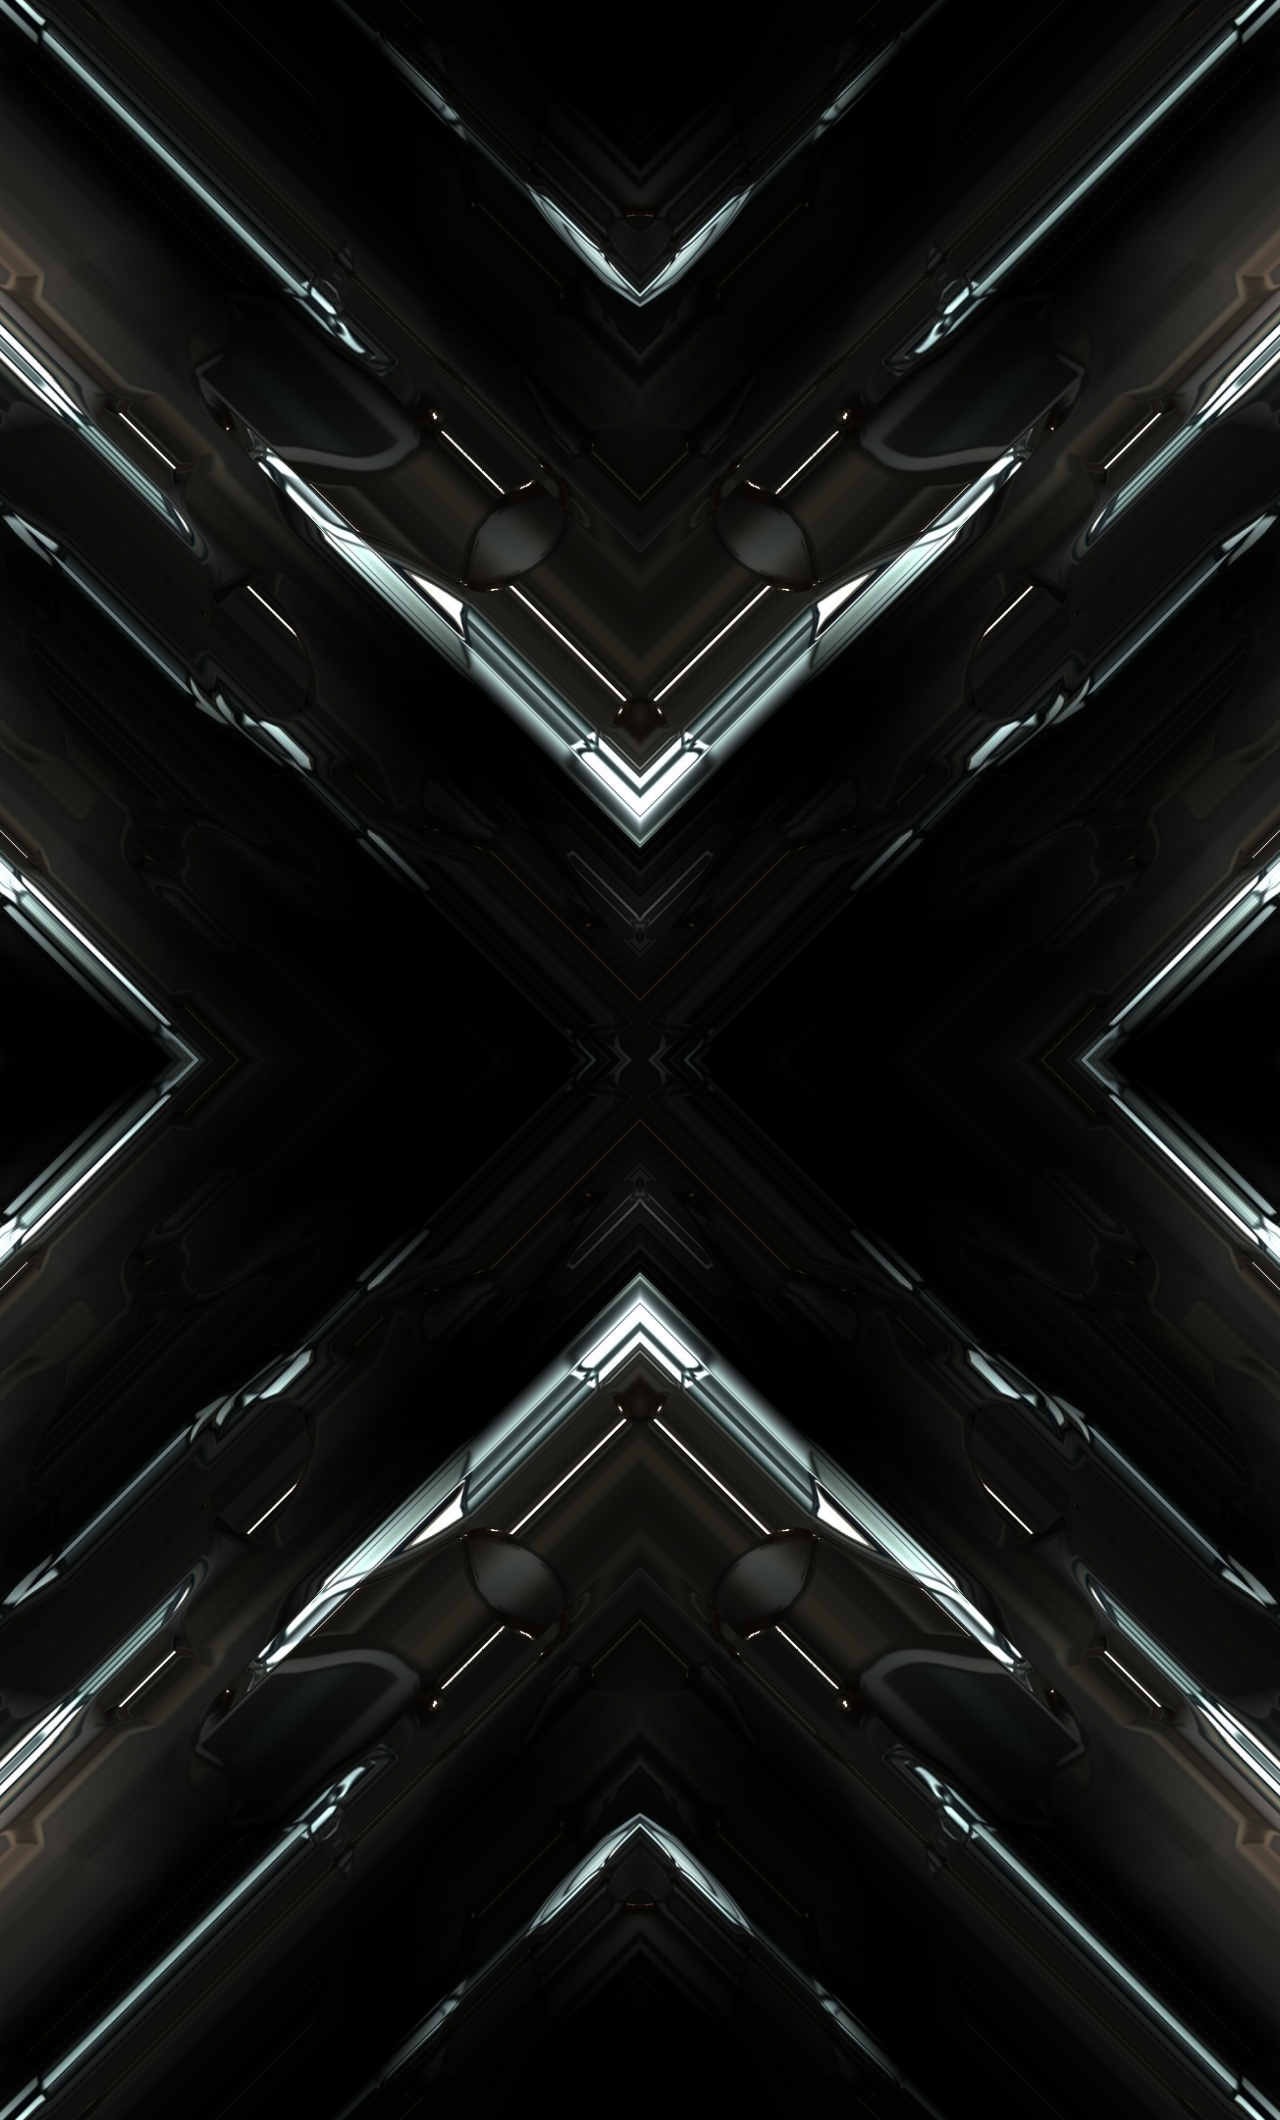 200+] Black Abstract Wallpapers | Wallpapers.com